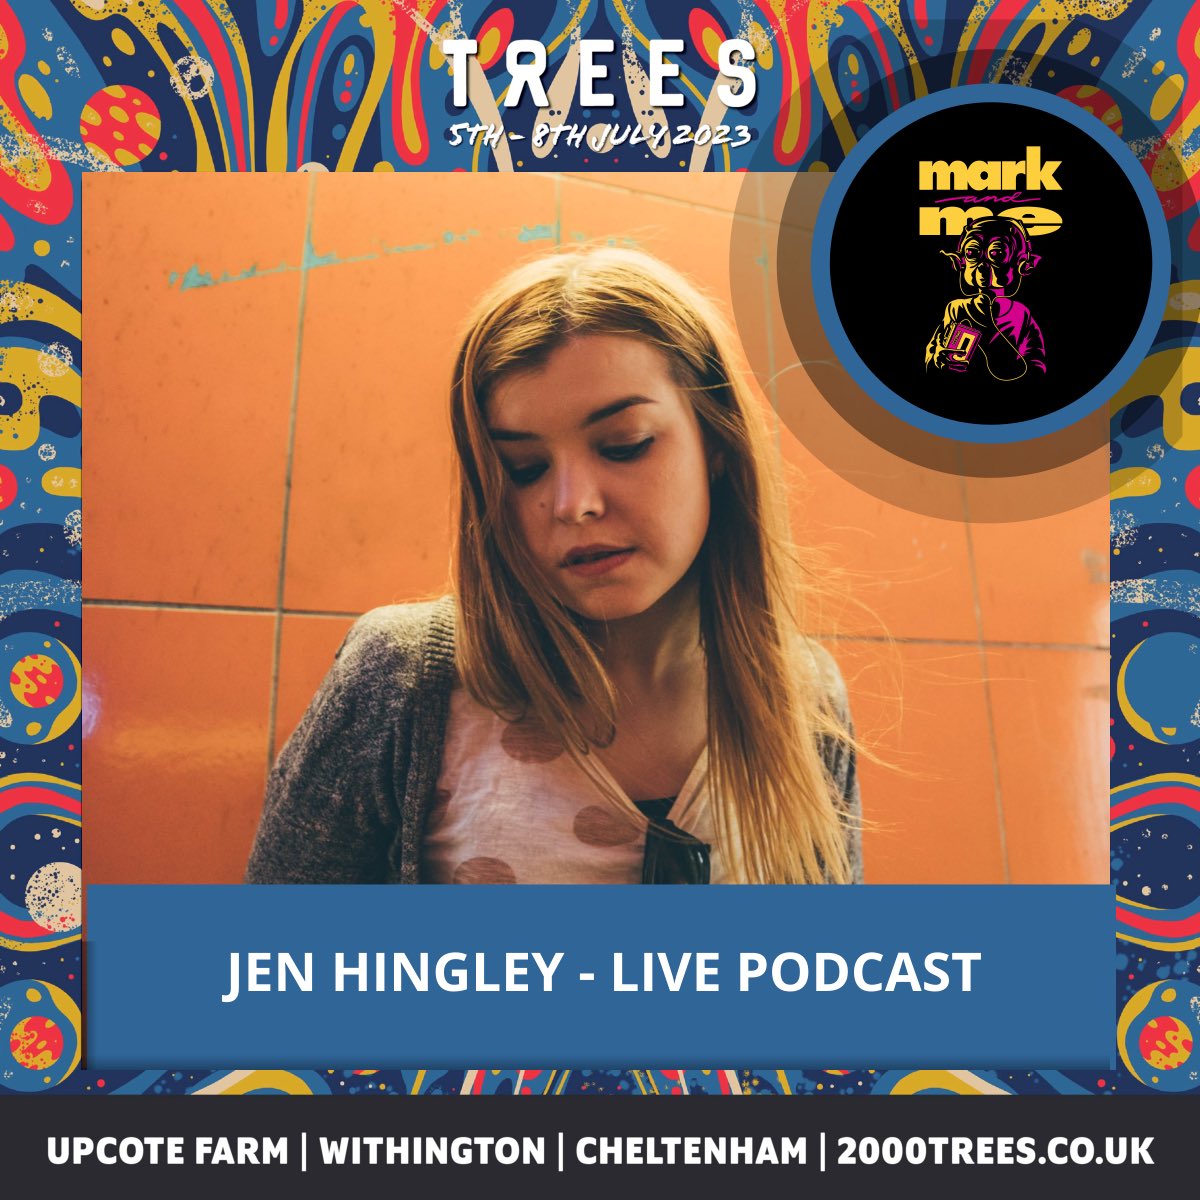 My @2000trees live podcast special with @jenhingley from @falseadv & @jamielenman is out now for you all to listen to! Listen to us talking all things music plus a special gameshow all recorded live. Available here linktr.ee/markandme #podcast #interview #2000trees